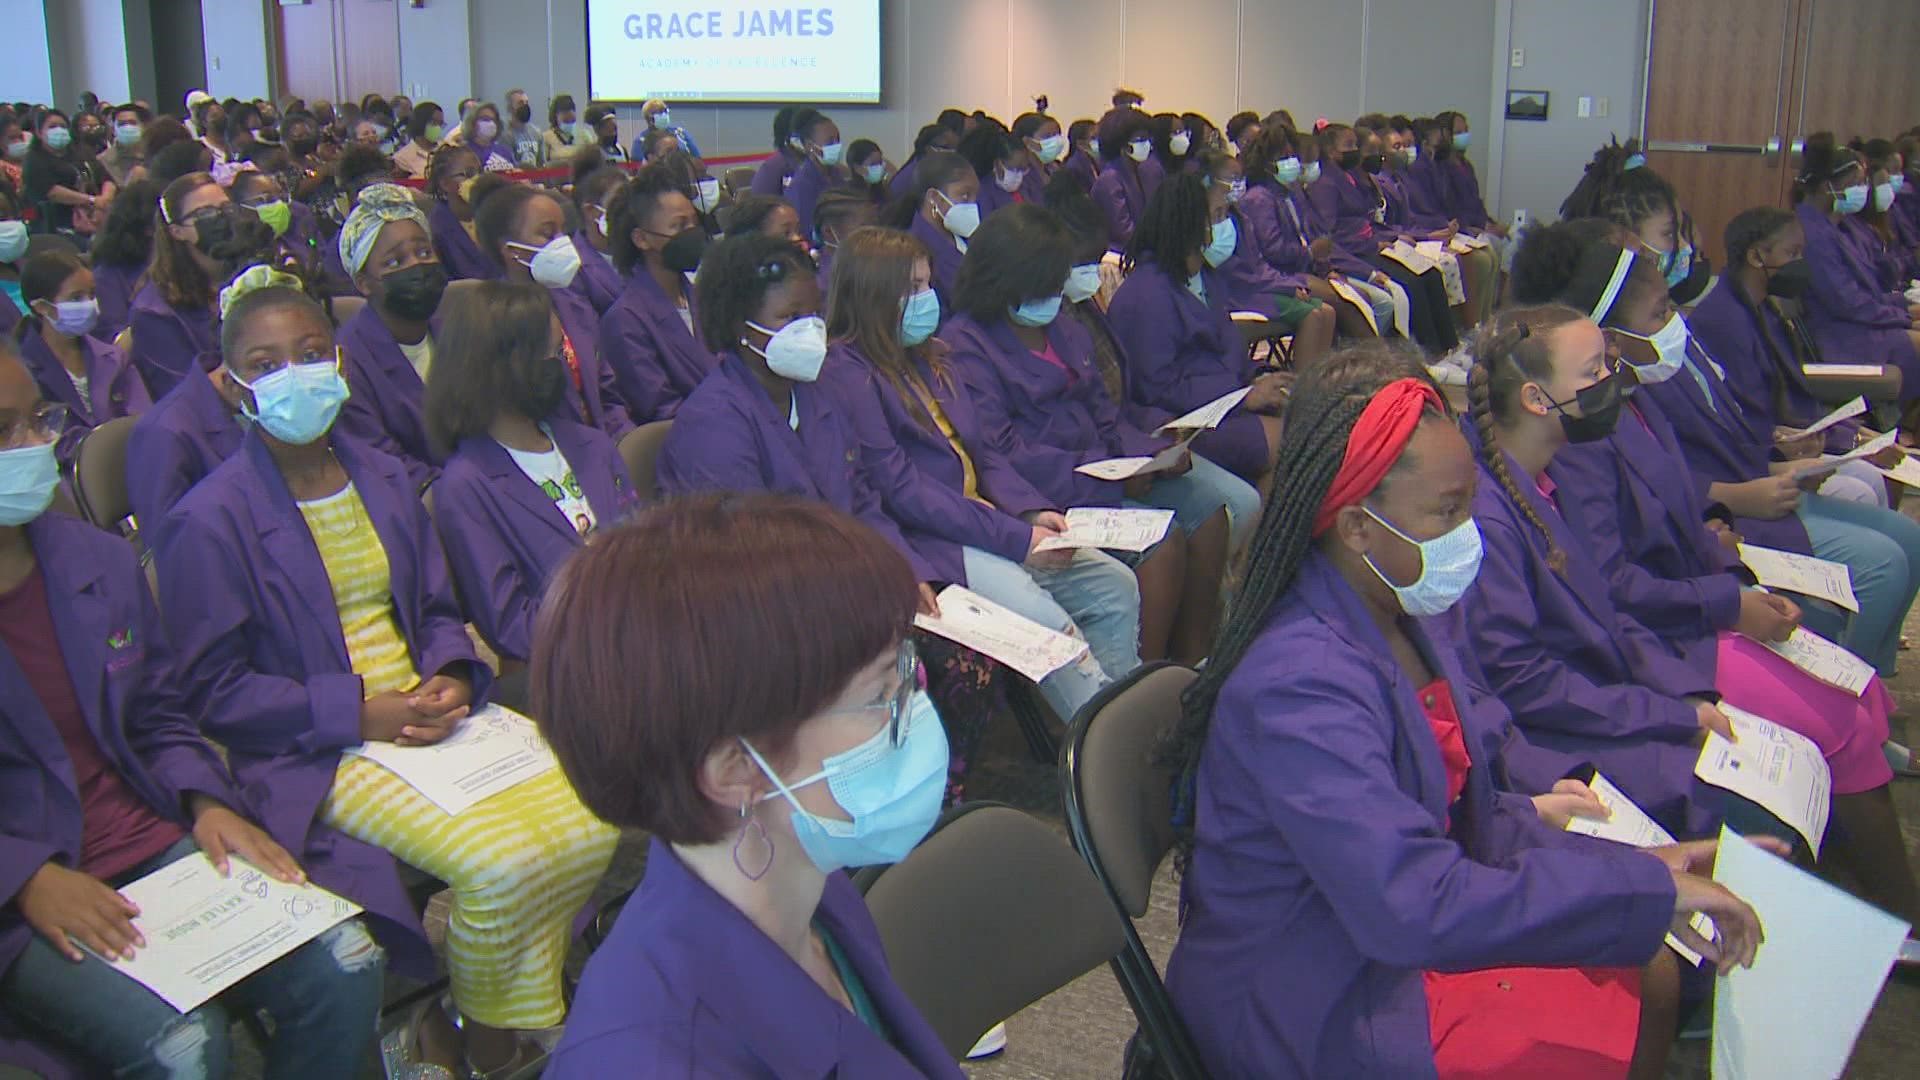 The incoming sixth-graders received their purple lab coats from women in the STEAM fields, which is the curriculum focus at the all-girls academy.